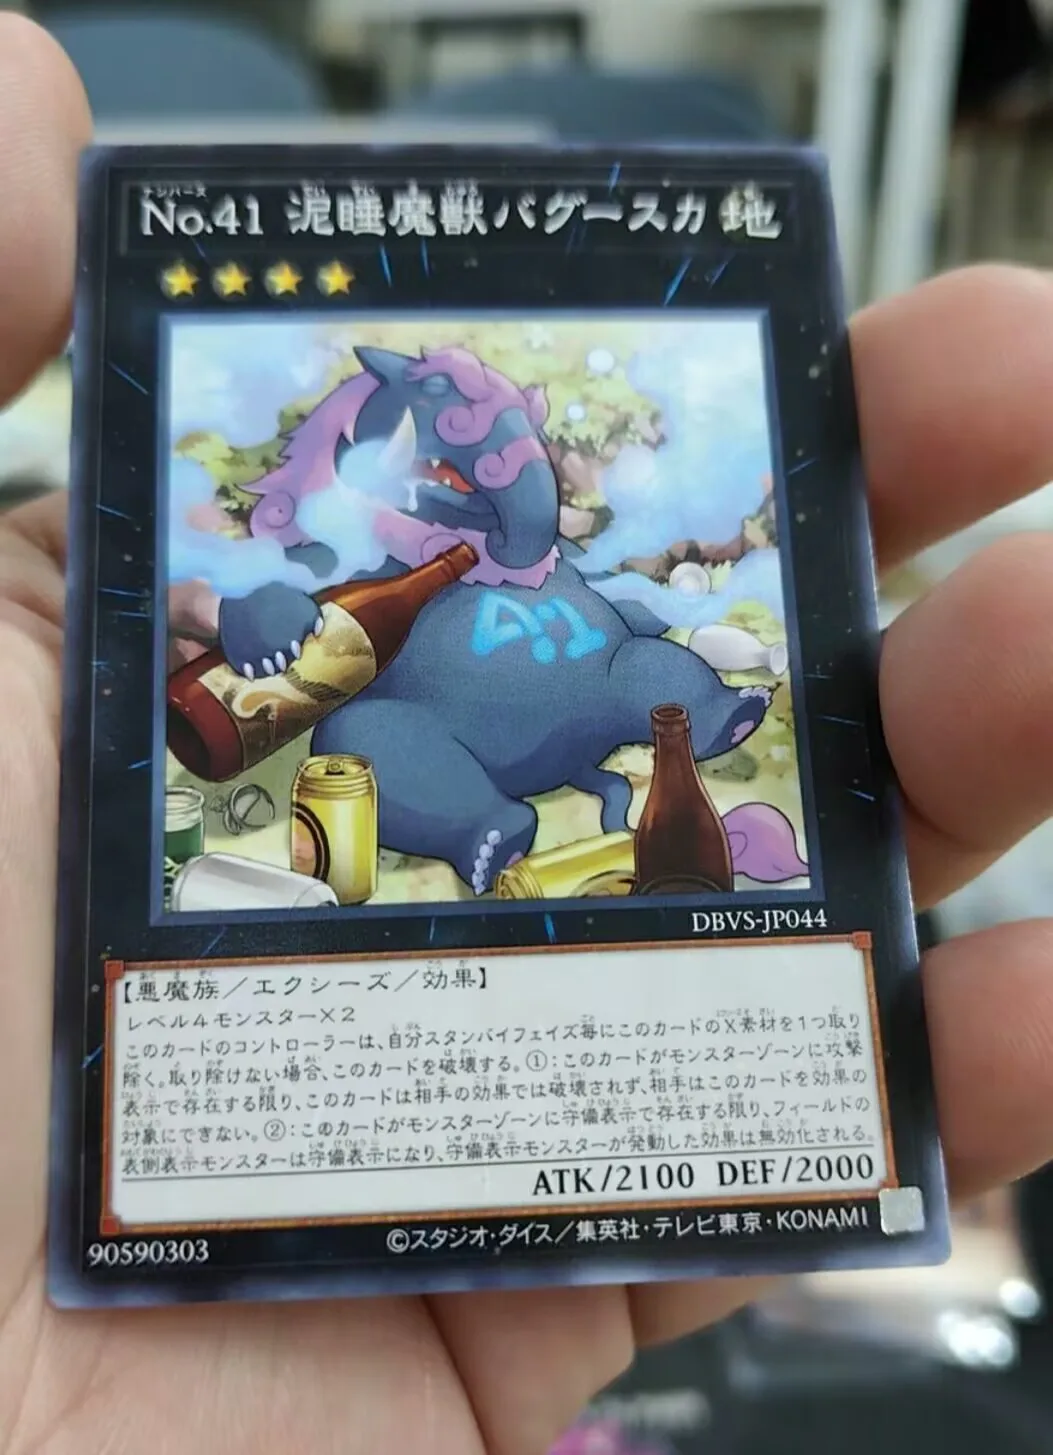 

DBVS-JP044 - Yugioh - Japanese - Number 41: Bagooska the Terribly - Common Normal Collection Mint Card